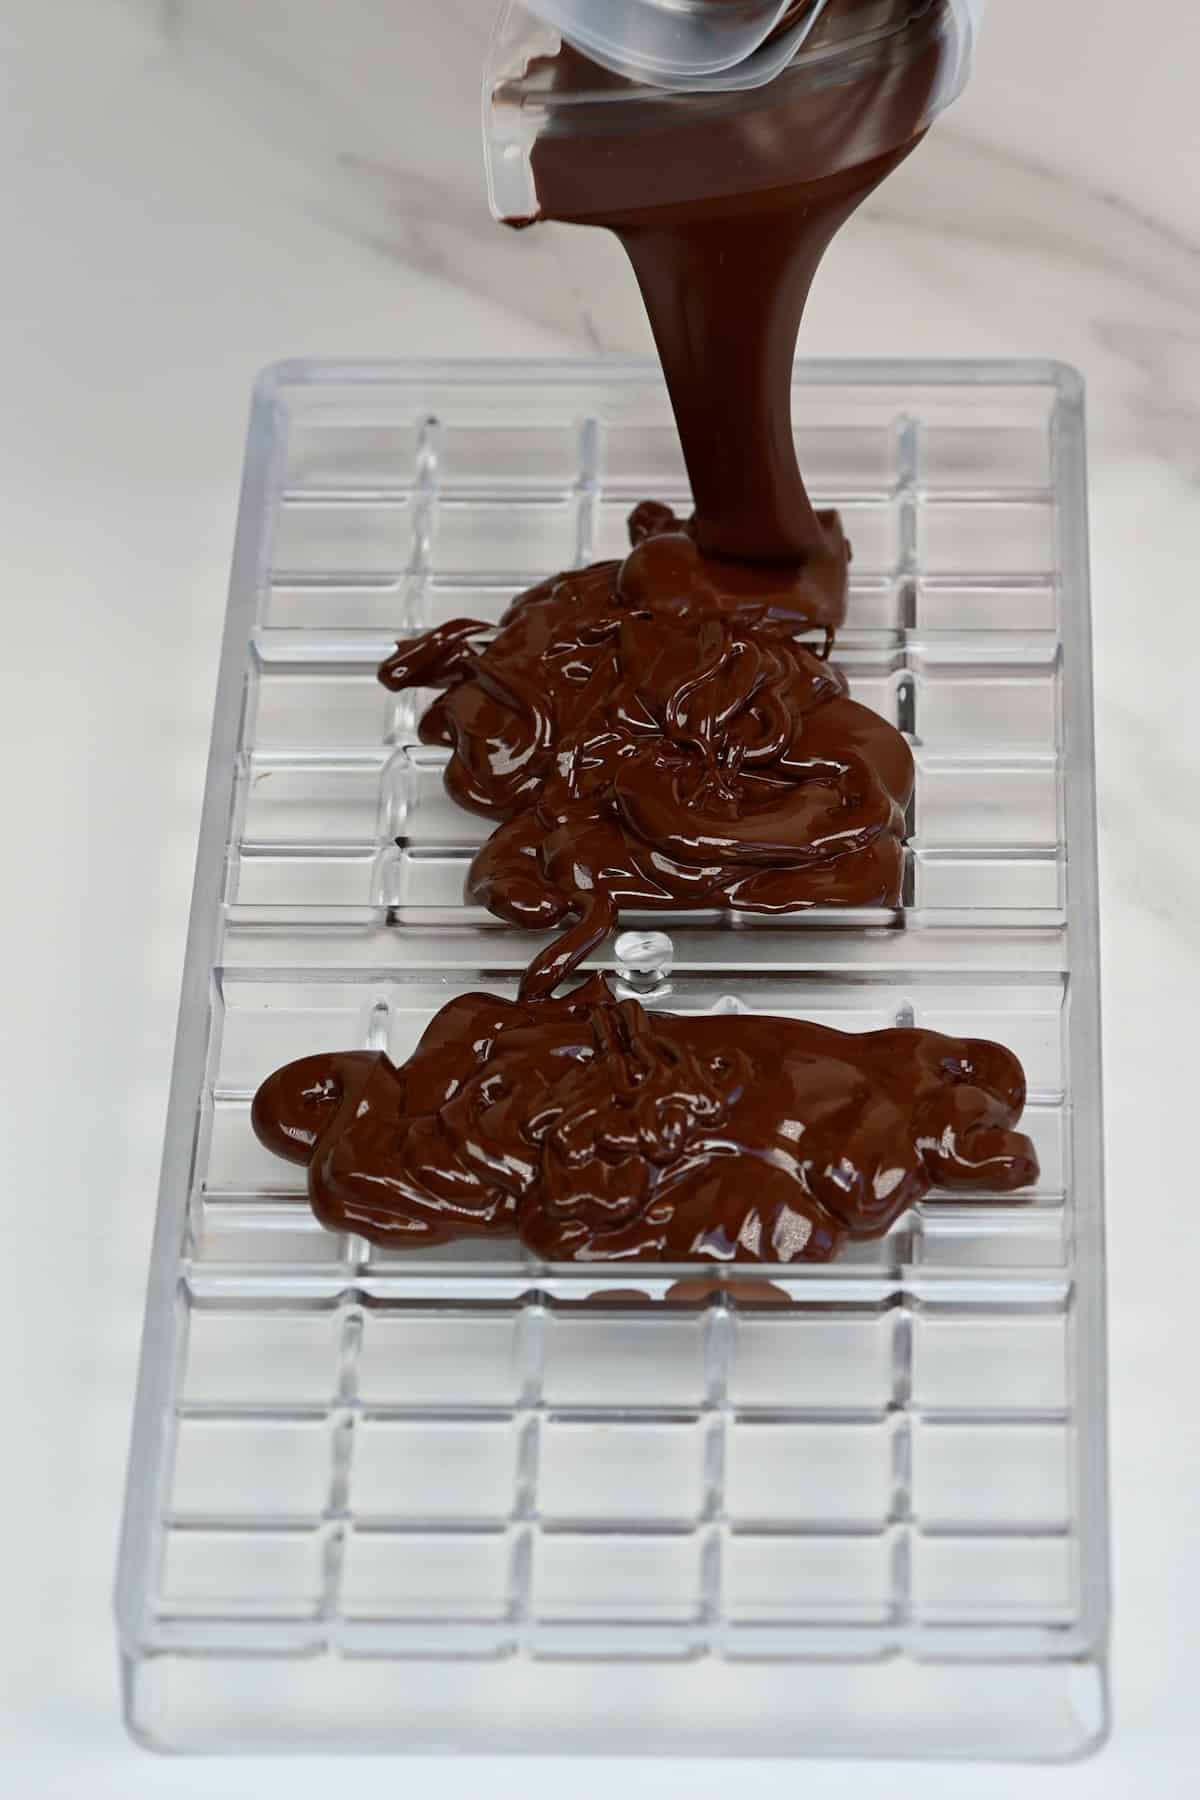 https://www.alphafoodie.com/wp-content/uploads/2021/04/Pouring-melted-chocolate-in-a-mold.jpeg